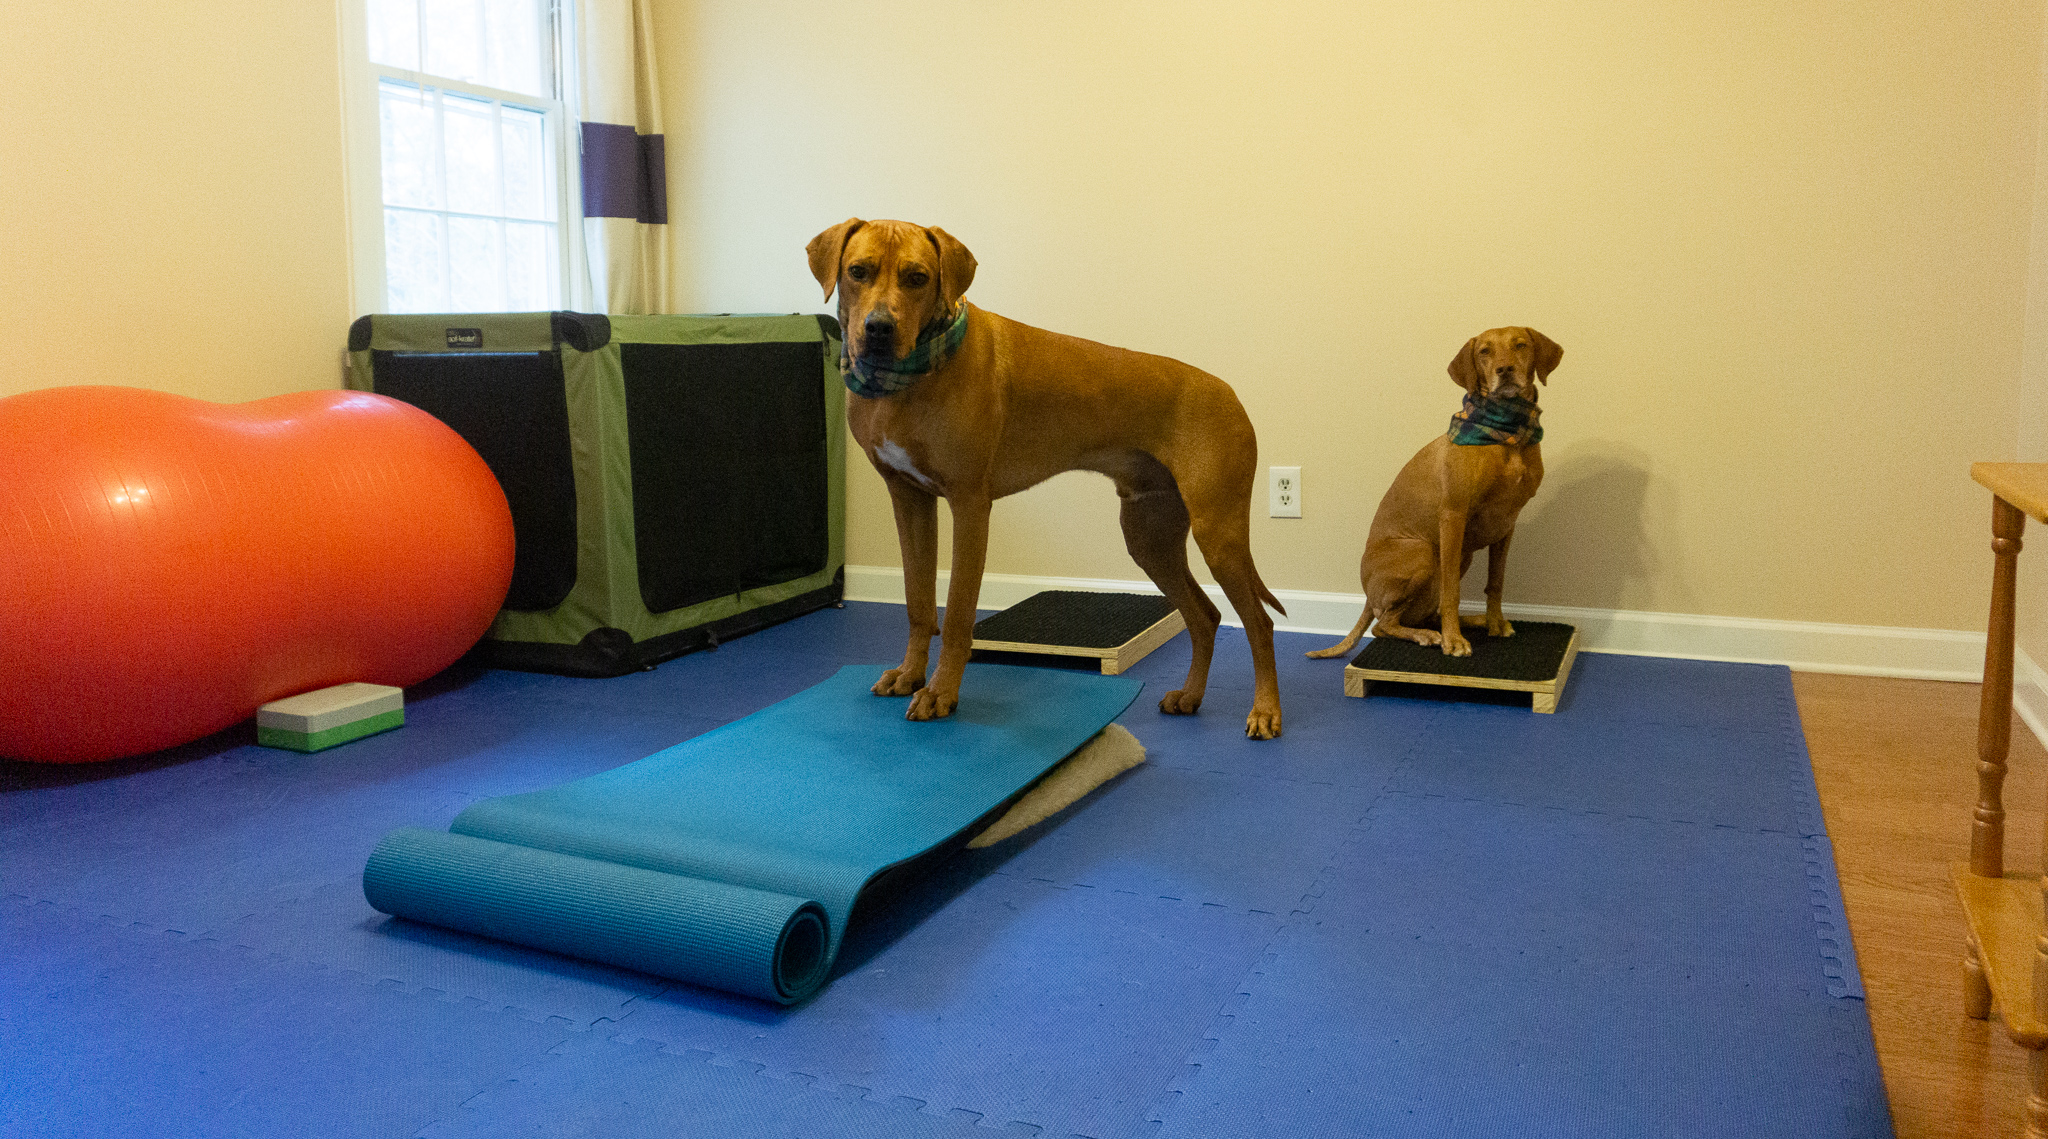 Setting Up a Home Dog Gym